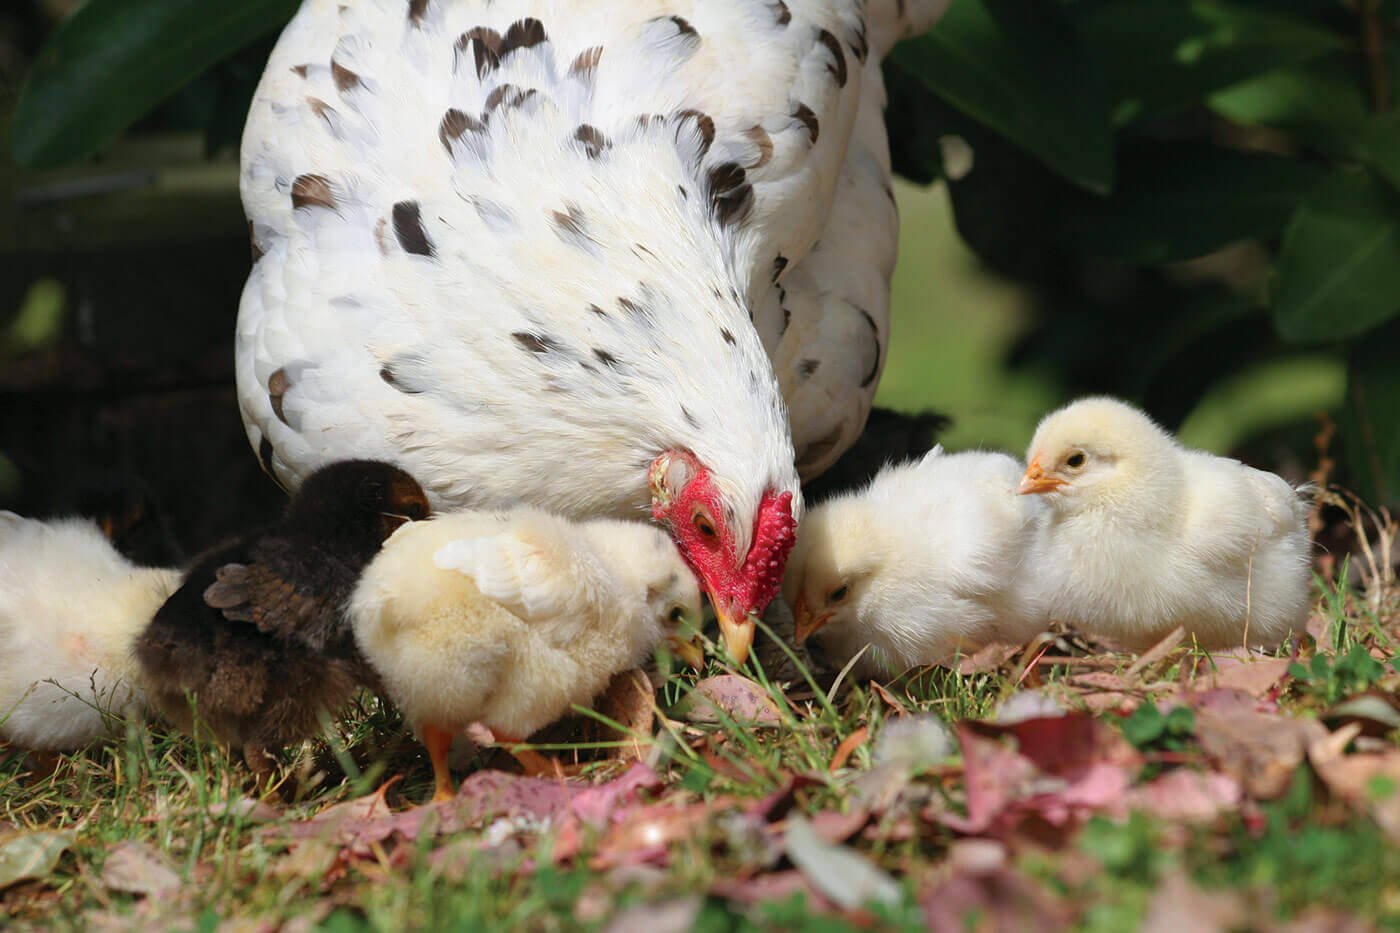 mother chicken with baby chicks, to show the birds in a more natural state and encourage researchers not to meddle with chicken genetics